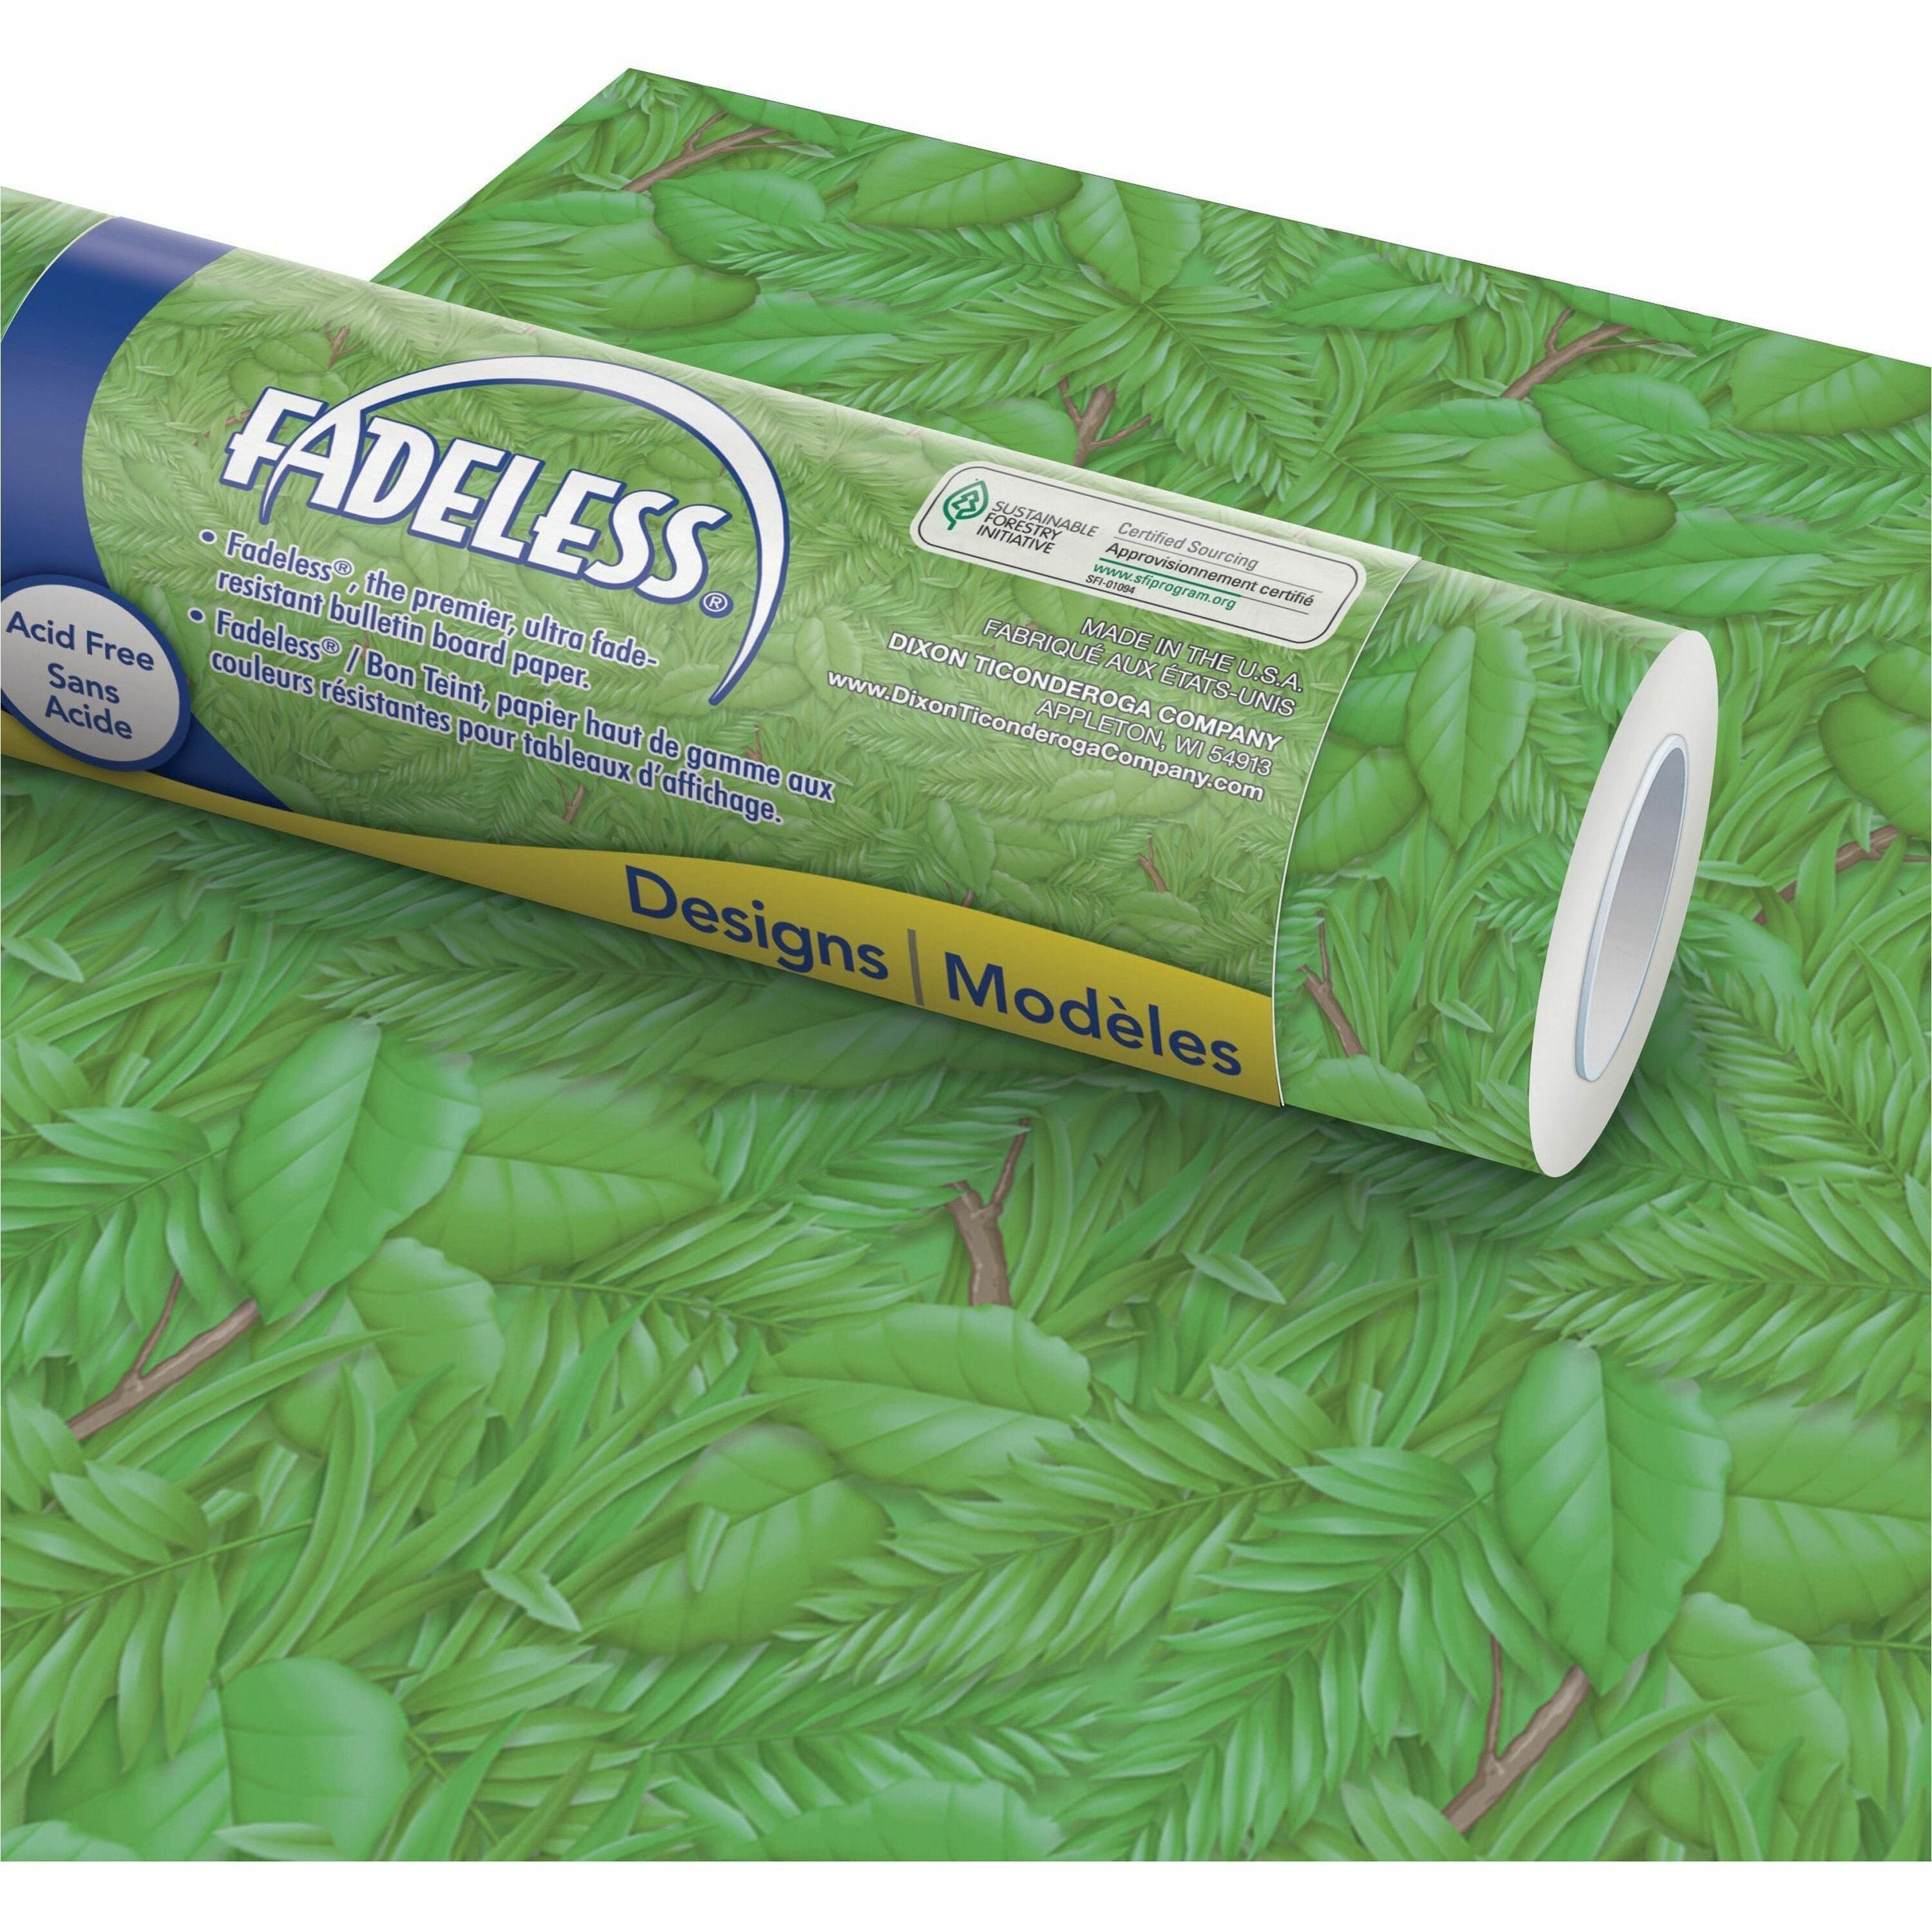 fadeless-bulletin-board-paper-rolls-classroom-door-file-cabinet-school-home-office-project-display-table-skirting-party-decoration-48width-x-50-ftlength-1-roll-tropical-foliage-paper_pacp0056255 - 1